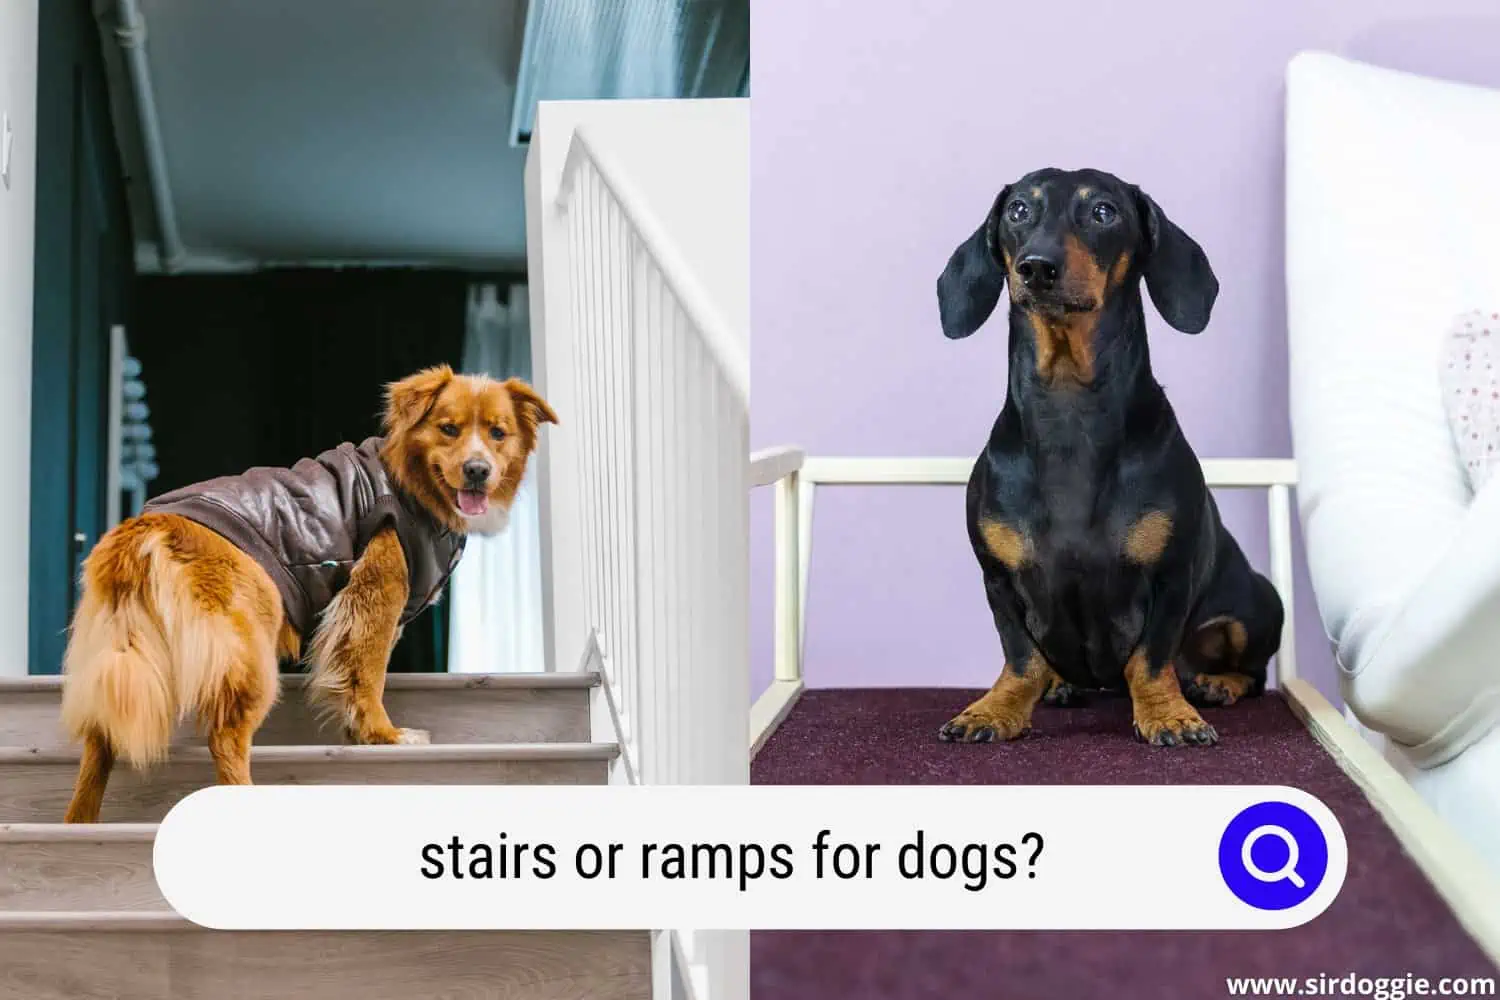 A dog walking in the stair and a dog on the ramp